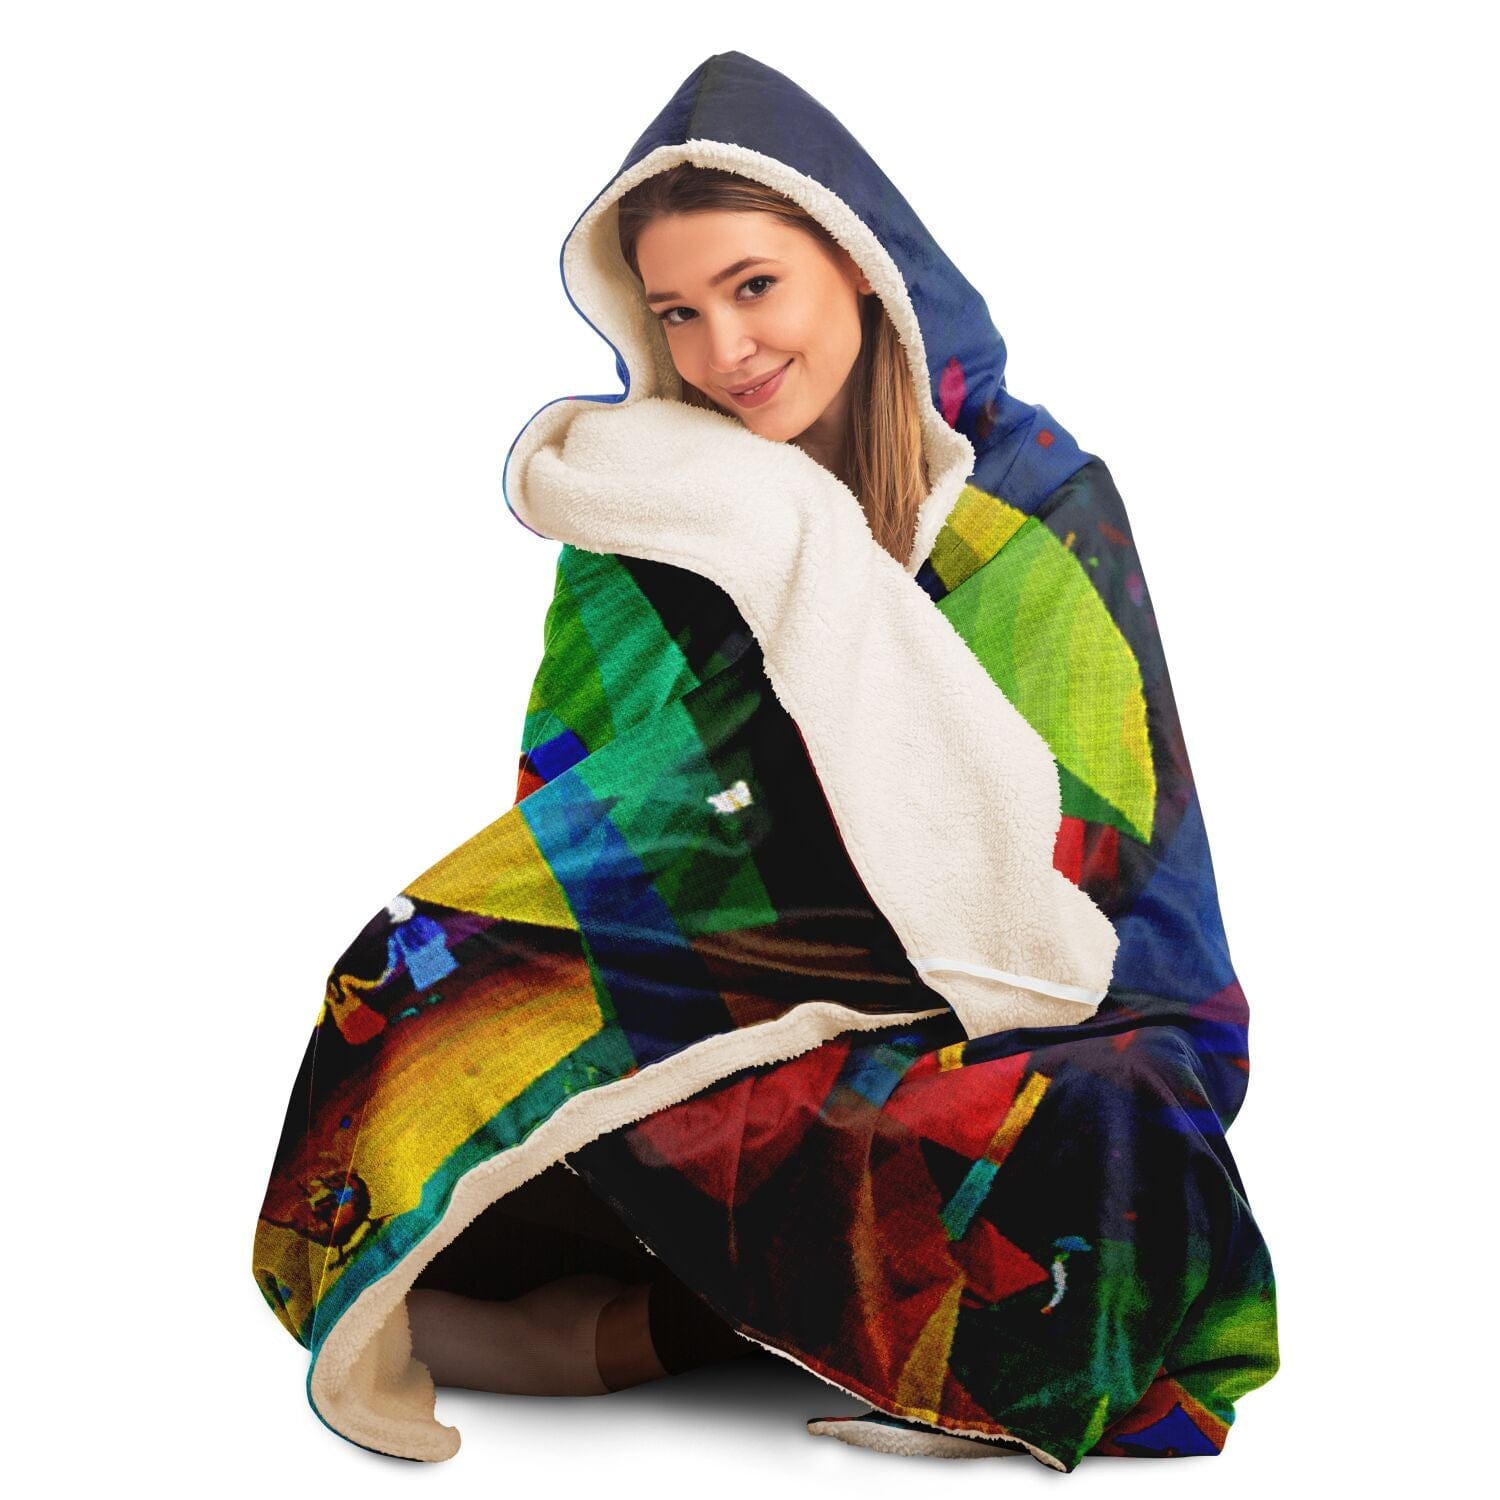 Cozy Campers Hooded Blanket being worn by a girl